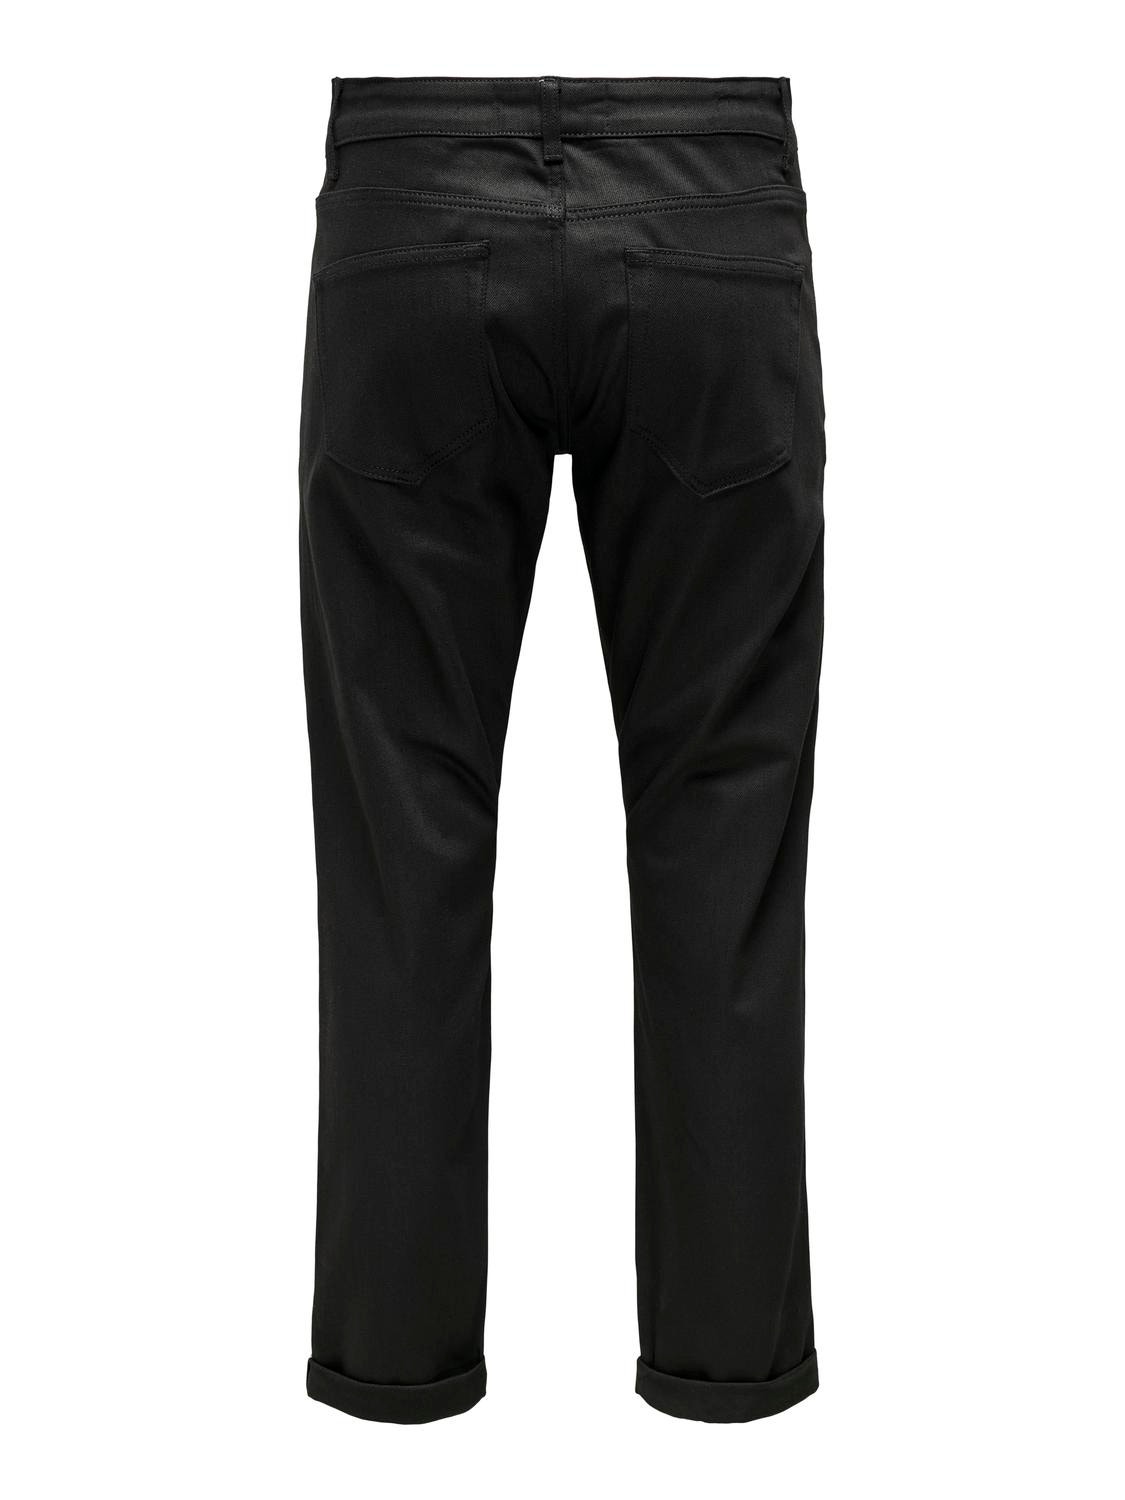 ONLY & SONS Jeans Regular Fit Taille moyenne -Black Denim - 22028311